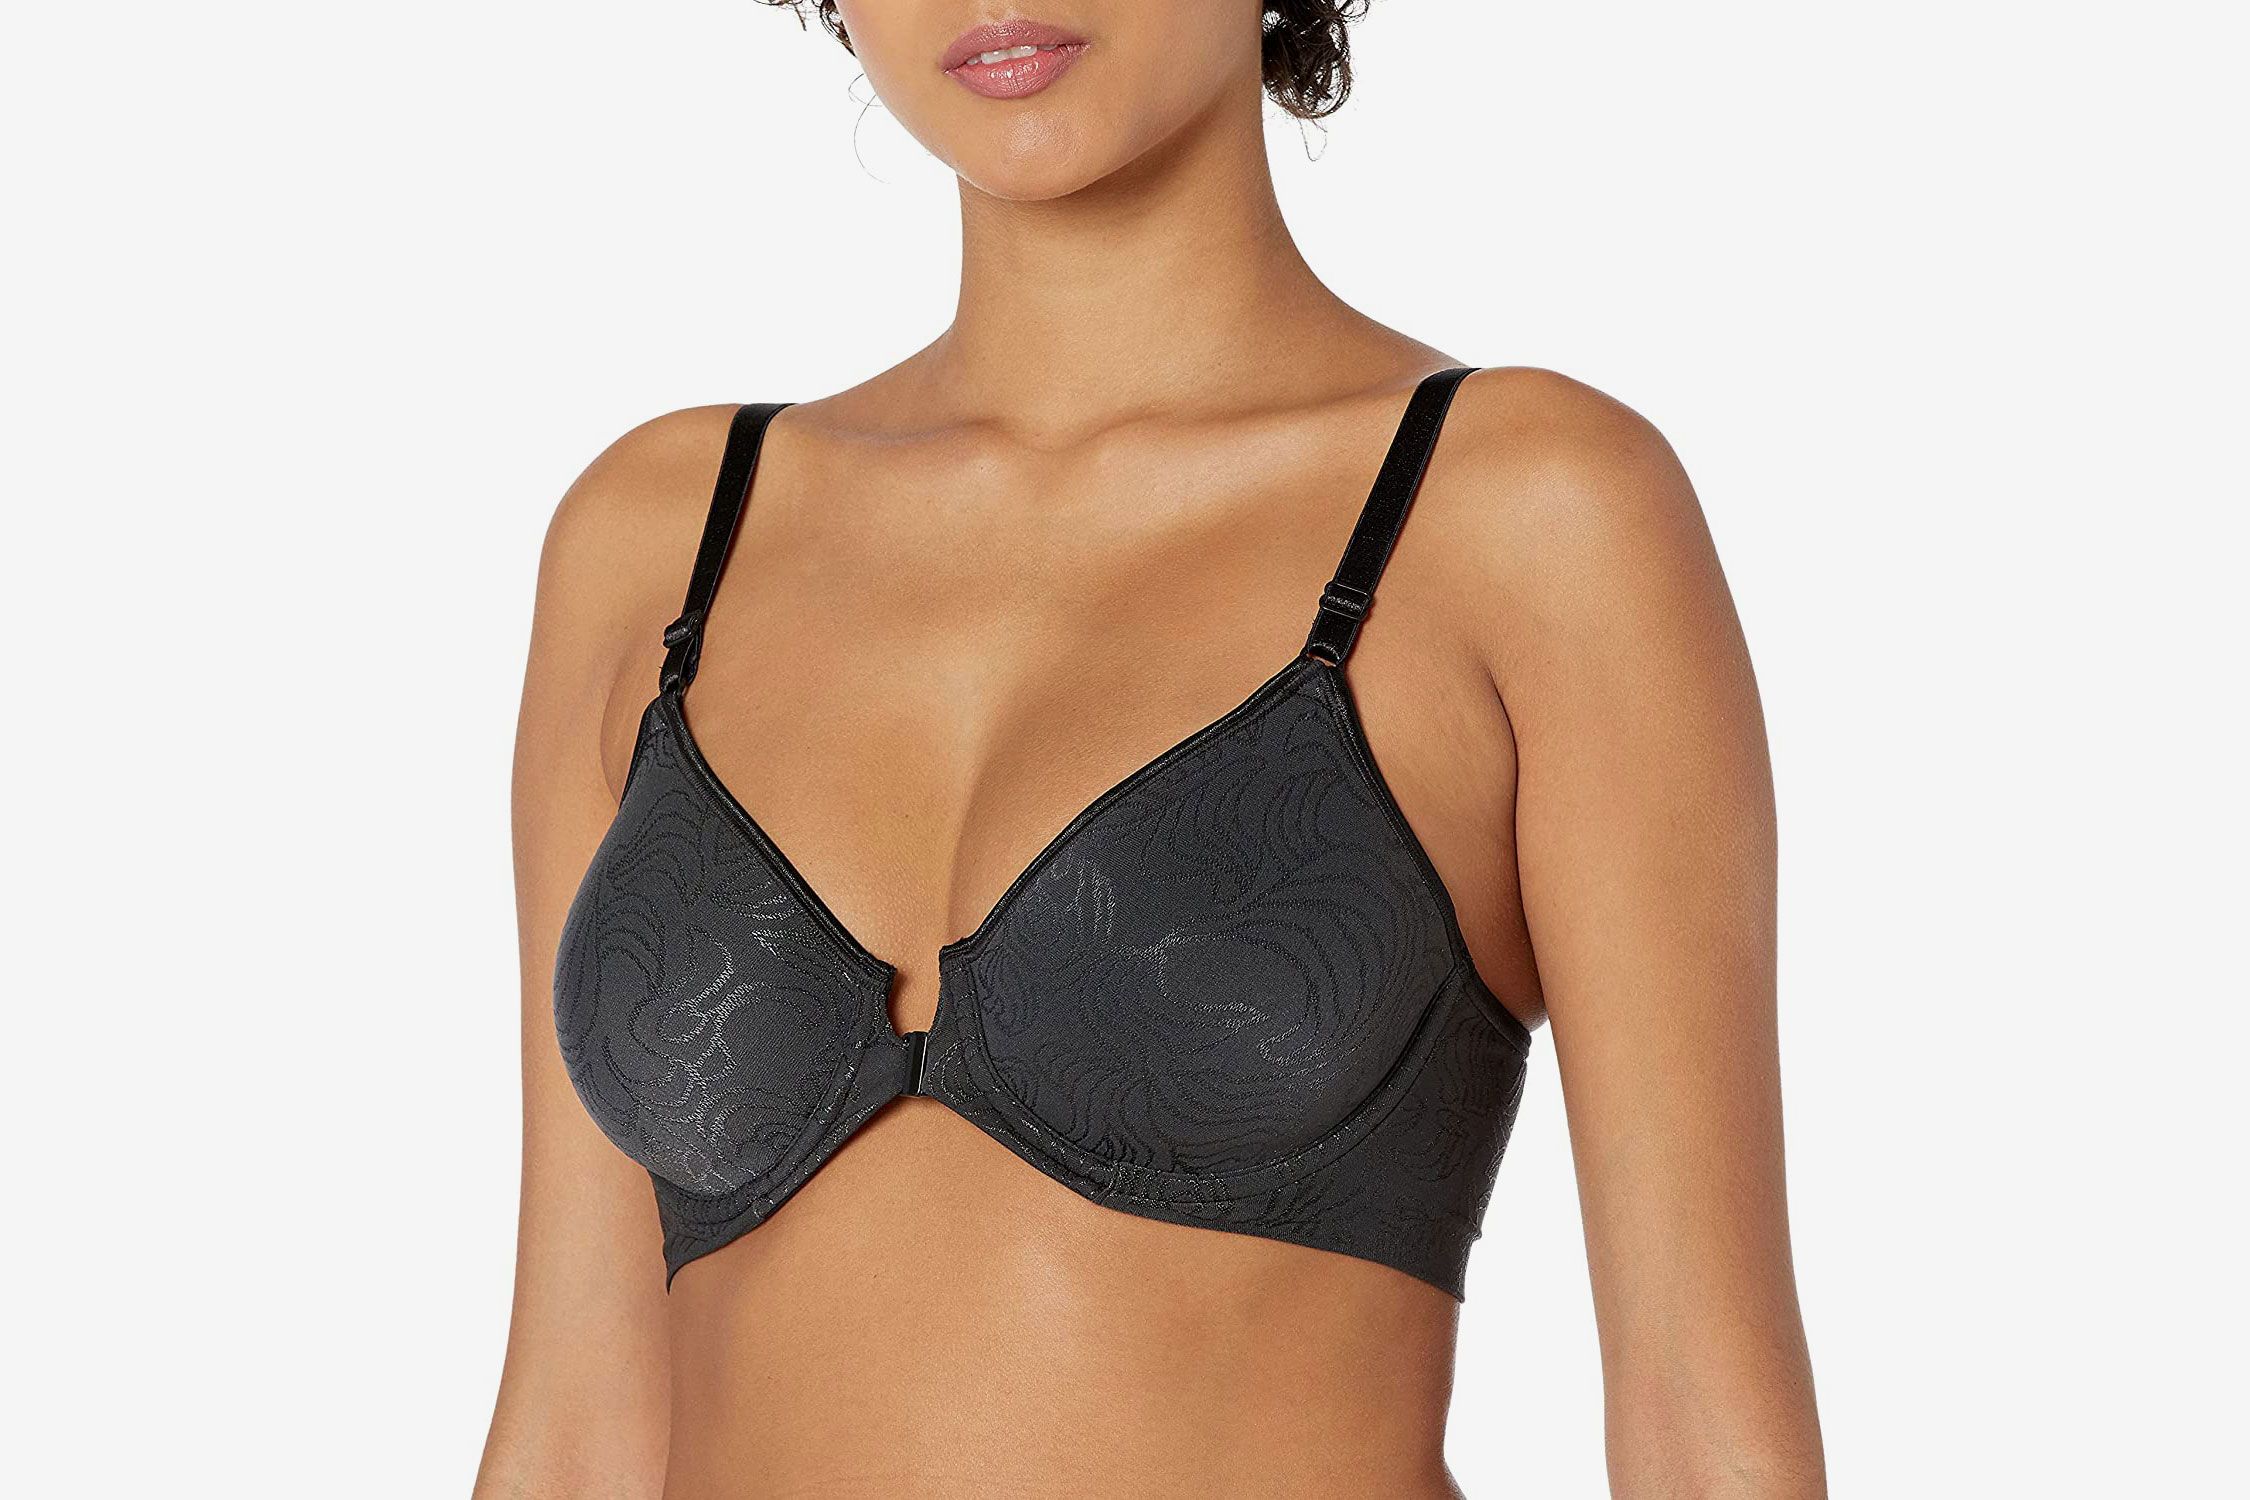 Experience unparalleled comfort with our all-new Cotton Minimizer Bra.  Designed specially for fuller busts, this style helps reduce proj